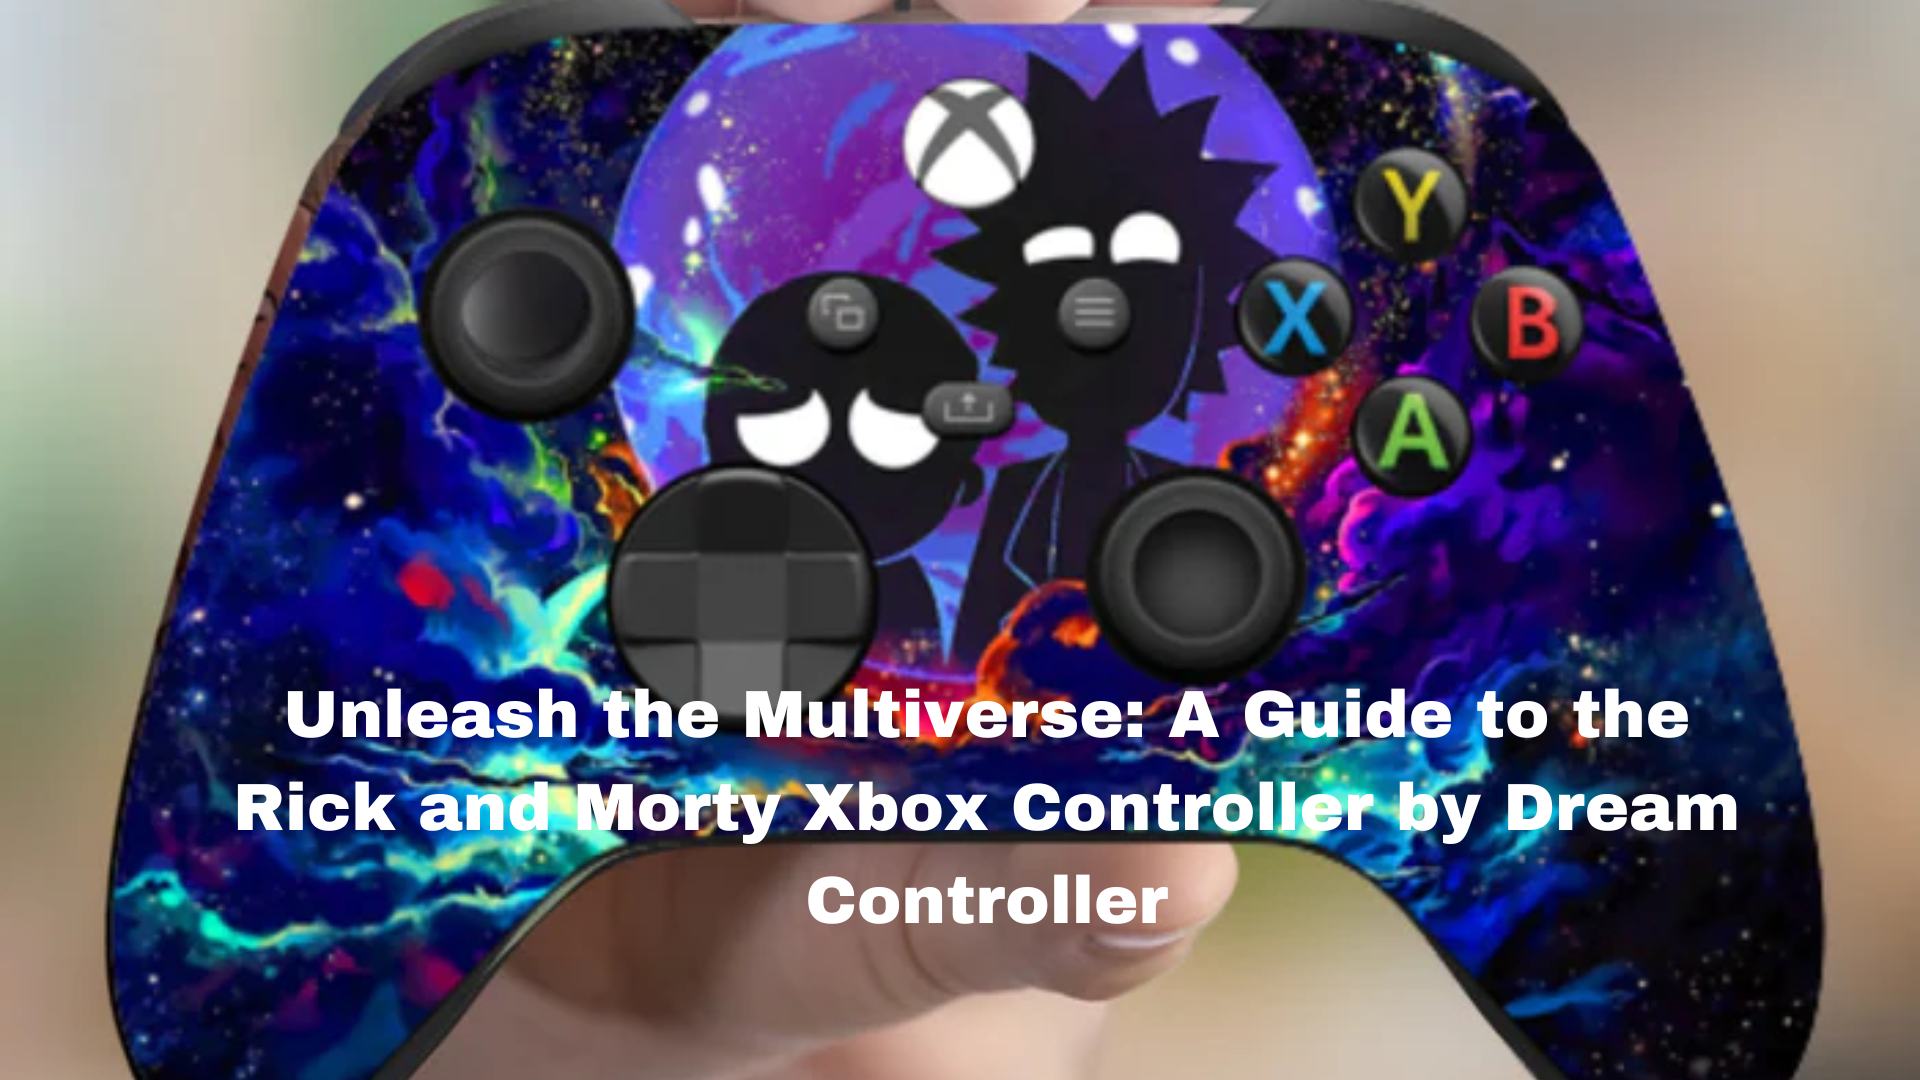 Unleash the Multiverse: A Guide to the Rick and Morty Xbox Controller by Dream Controller